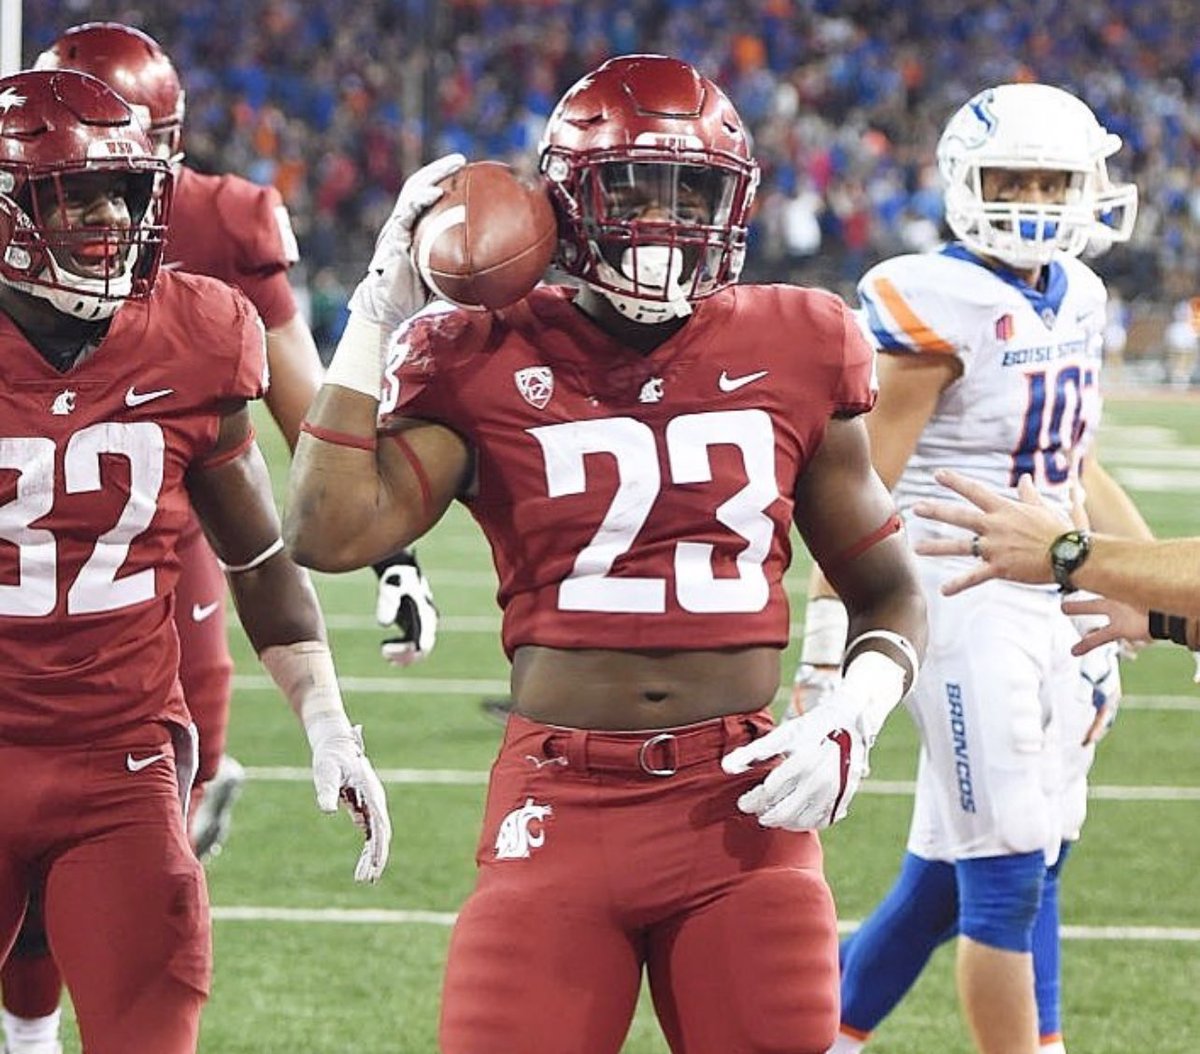 After a great conversation with the Cougars Coaching Staff, I am pleased to announce that I have received an offer from Washington State. #GoCougars @WSUCougarFB @GregBiggins @SierraCanyonFB @bruce_bible @COACHSTACE_ @CoachB212 @BrandonHuffman @alecsimpson5 @ChadSimmons_